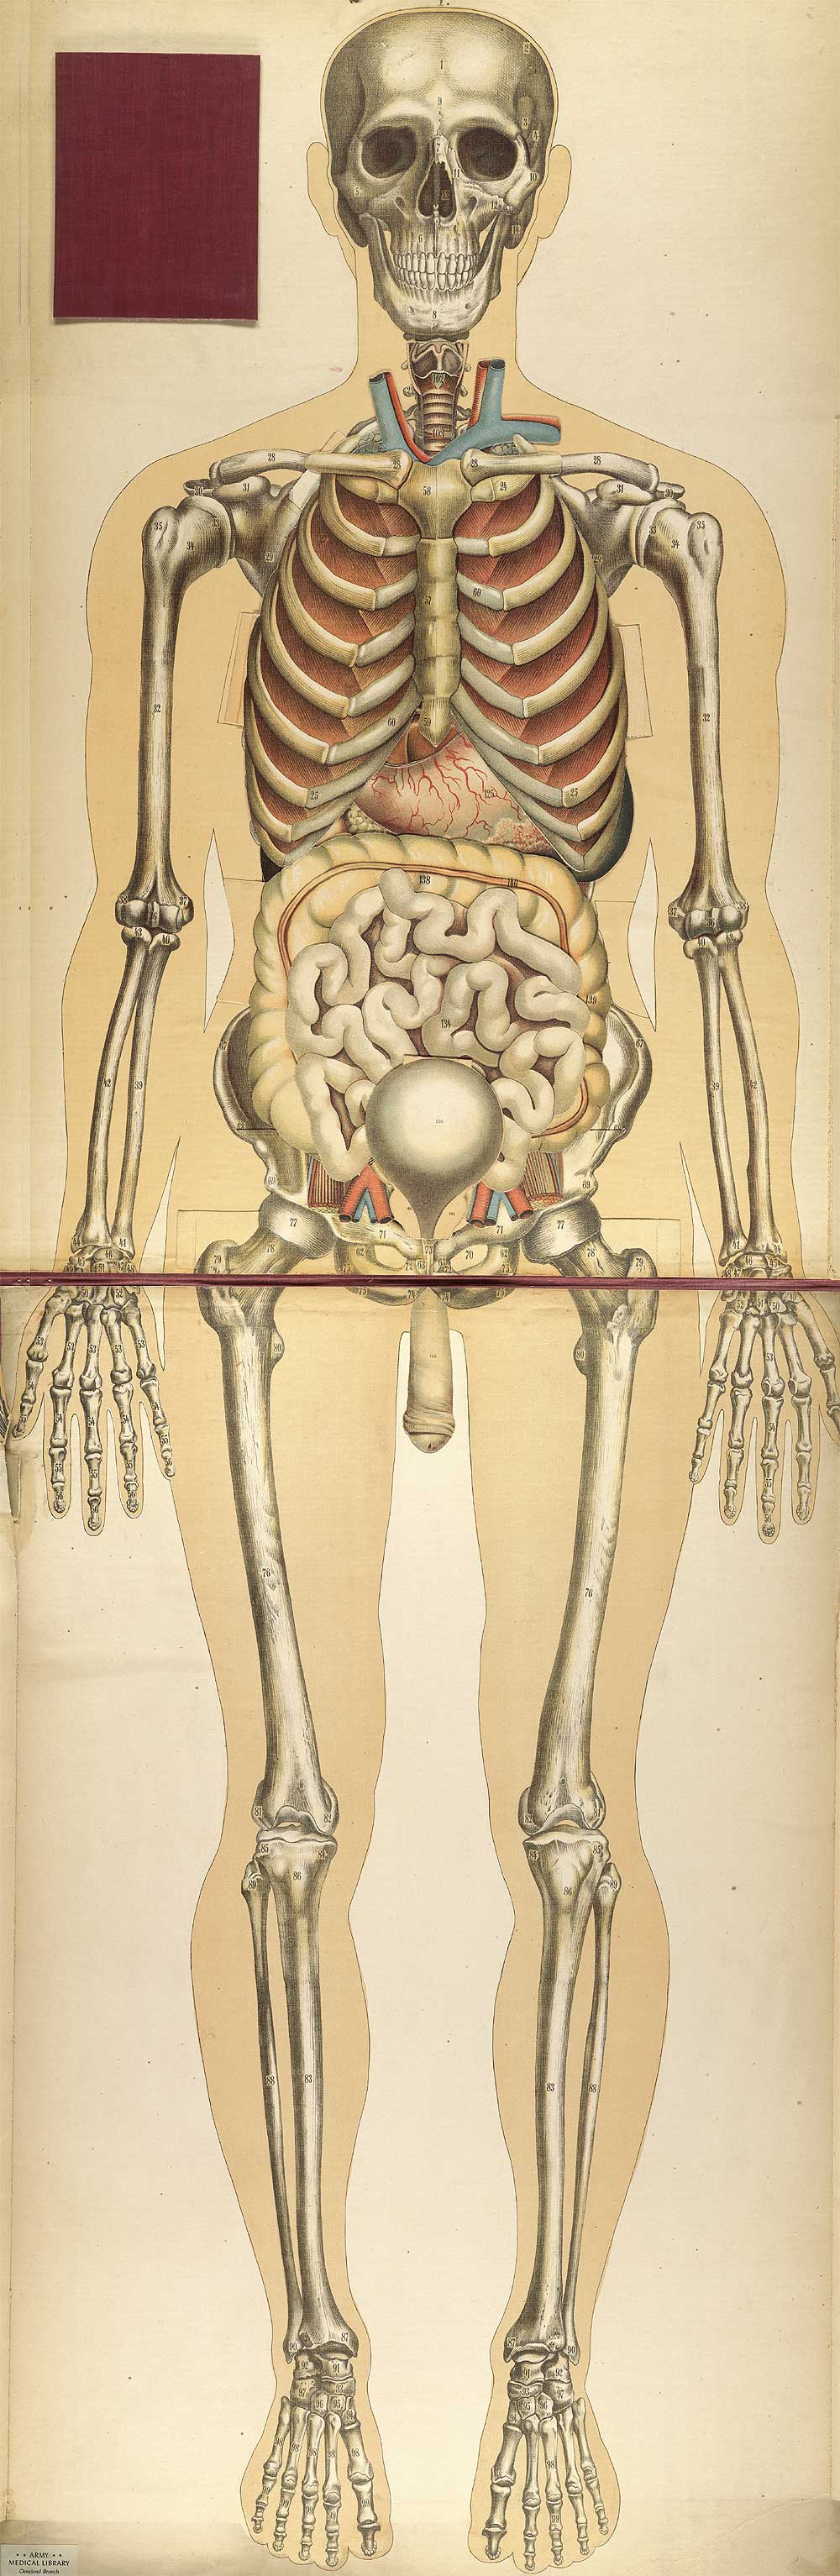 Chromolithograph showing the skeleton and internal organs of the human body, including the liver, intestines, lungs, and bladder, from Julien Bouglé’s Le corps humain en grandeur naturelle, NLM Call no. WE B758c 1899.